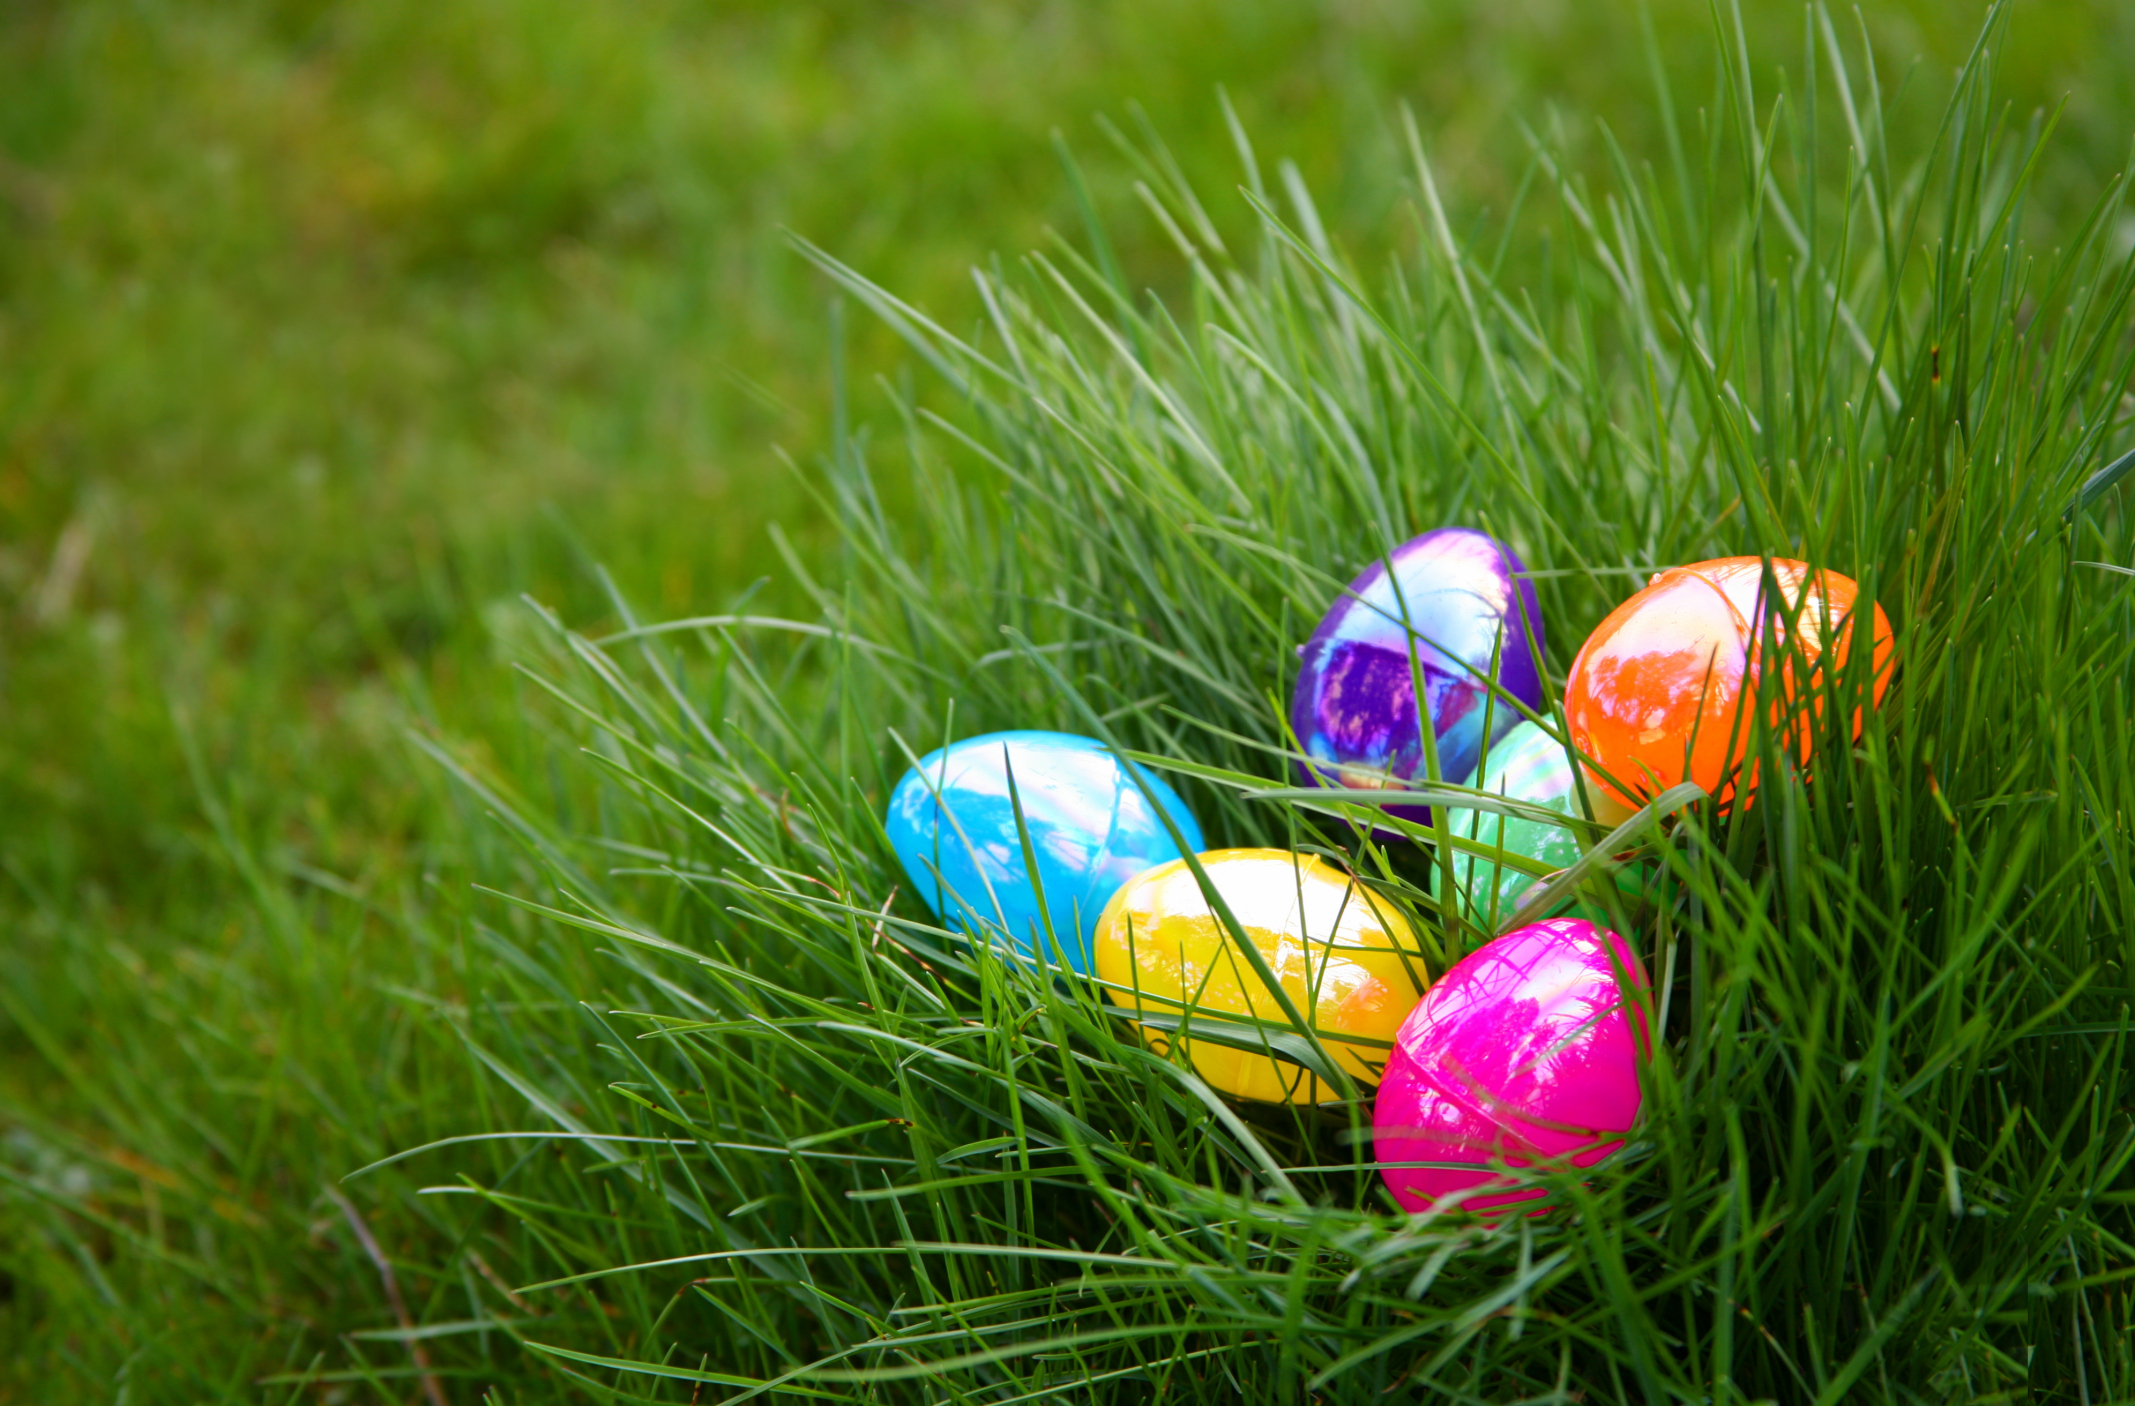 5 CREATIVE MARKETING IDEAS FOR EASTER!